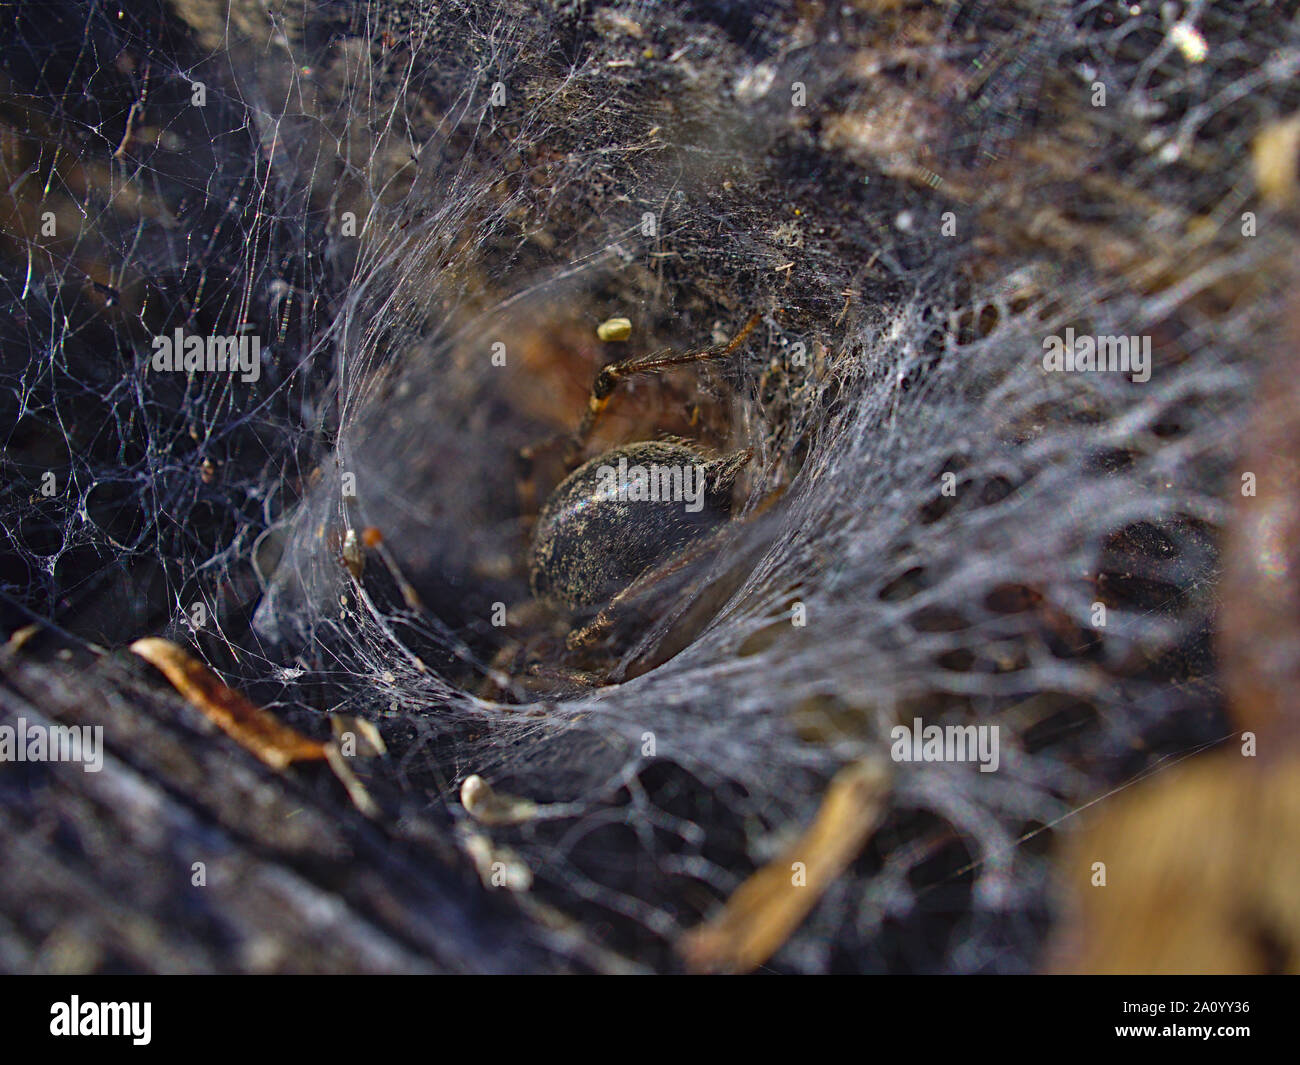 Plump opisthosoma (abdomen) of a grass spider (Agelenopsis spp.) disappearing into its funnel web. Stock Photo